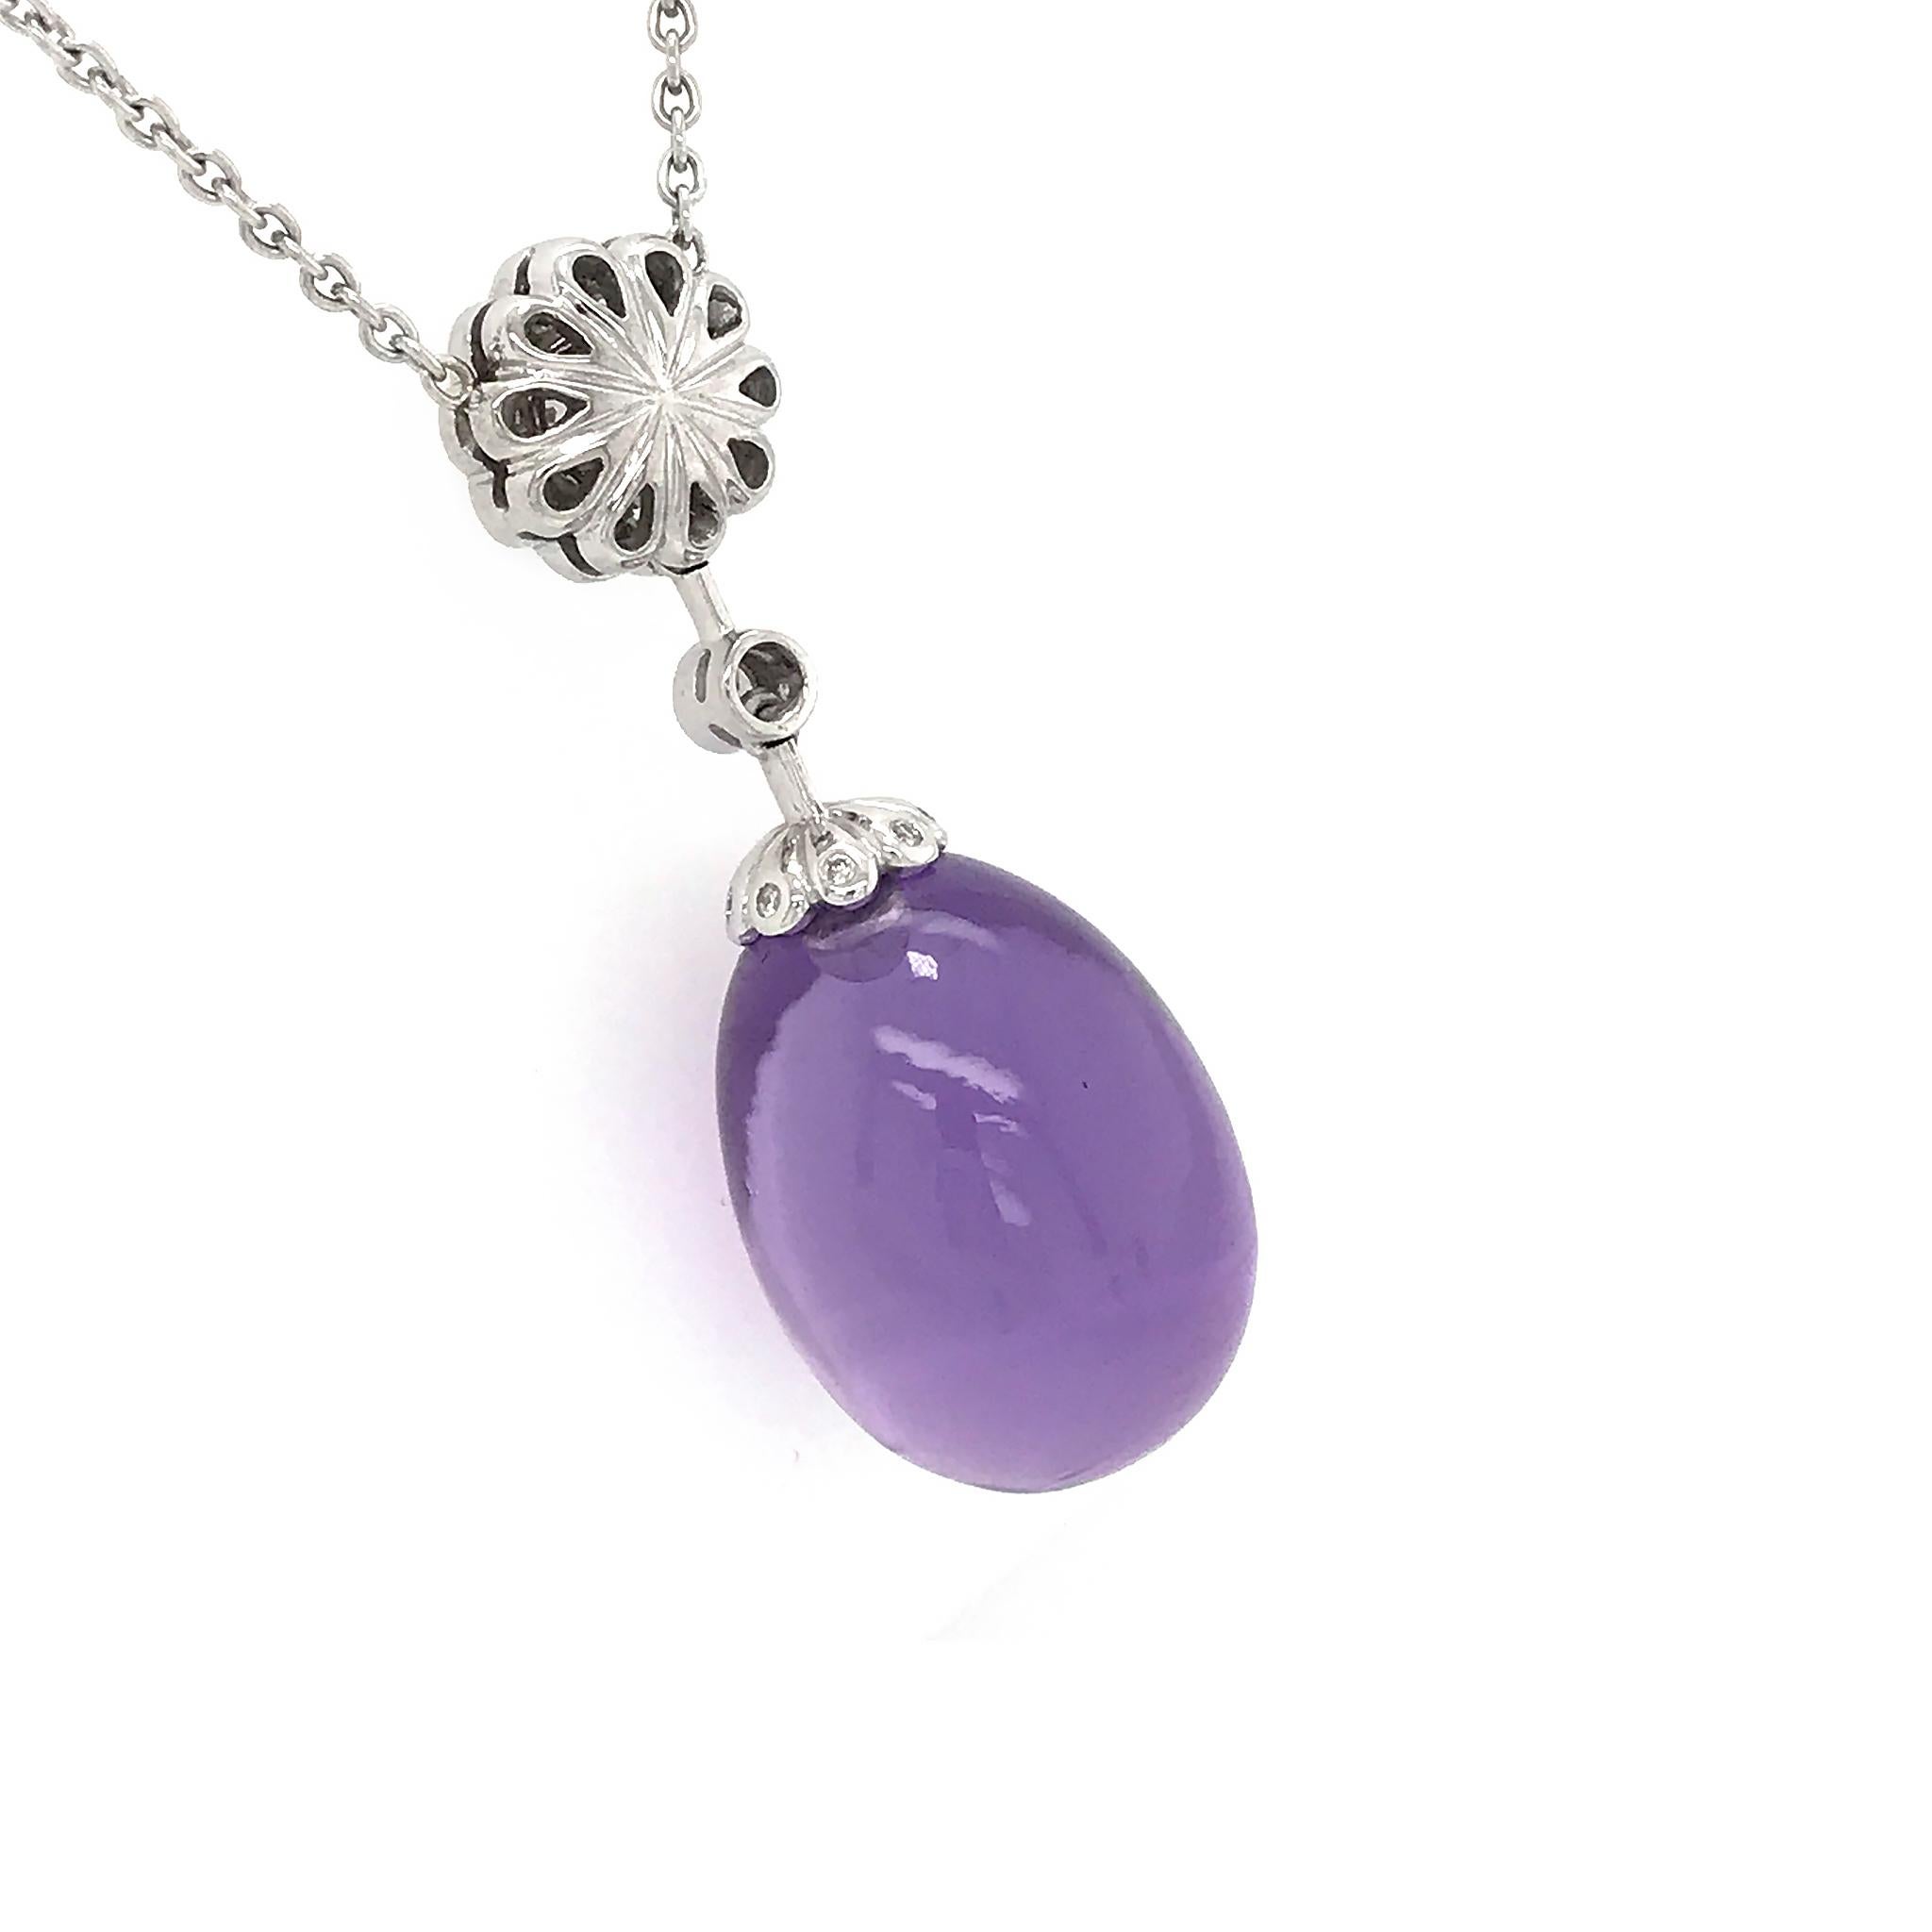 Modern Fabergé Imperial Karenina Diamond and Amethyst Egg Pendant Necklace In Excellent Condition For Sale In New York, NY